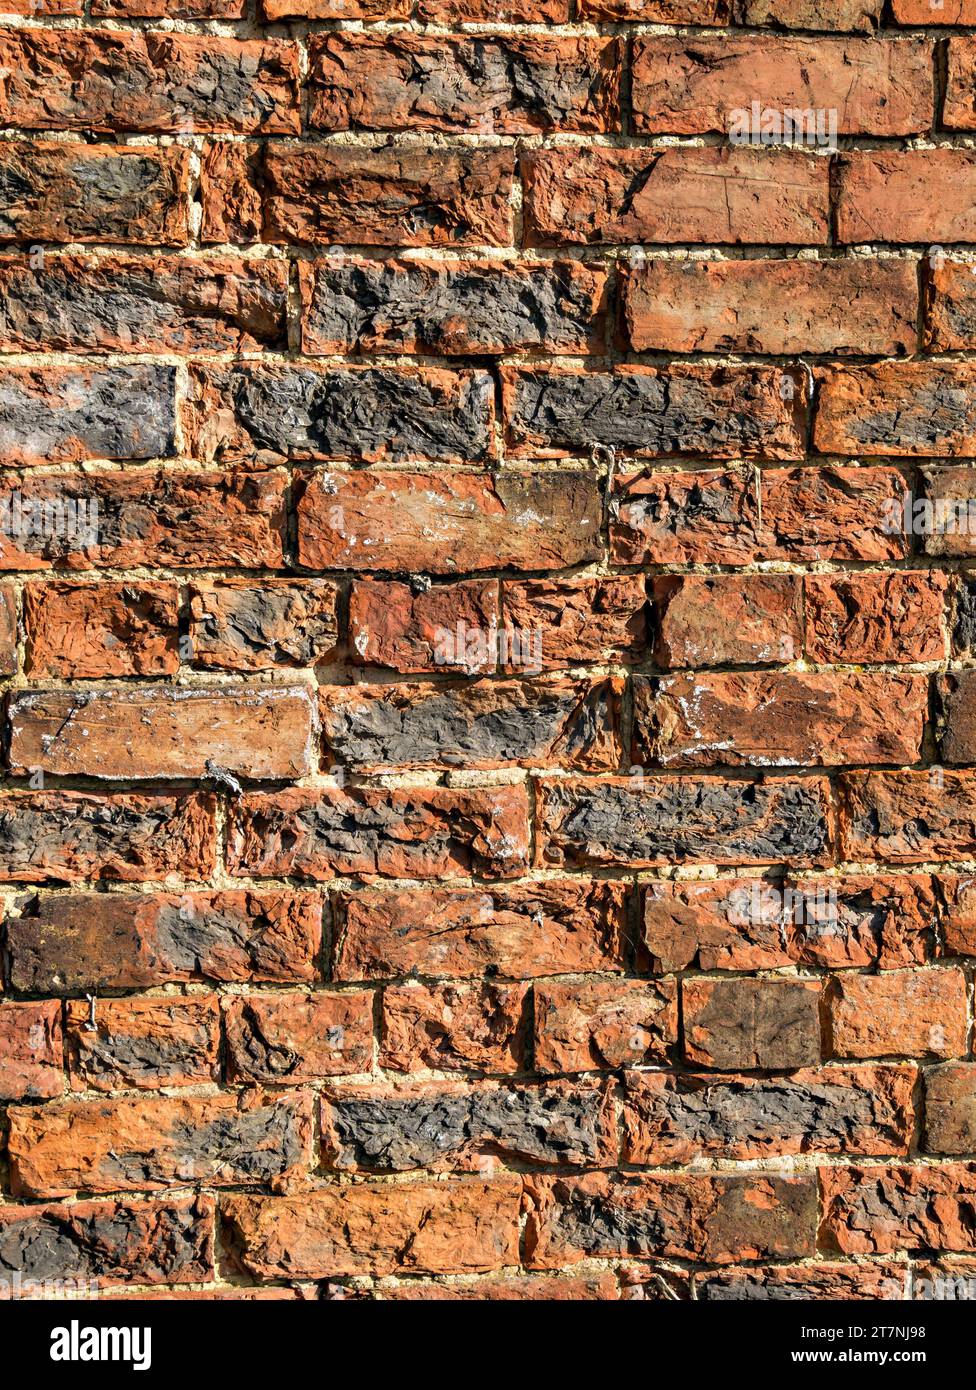 Old red brick wall showing frost damage / weathering resulting in spalling / bursting / crumbling / cracking of brick faces, England, UK Stock Photo